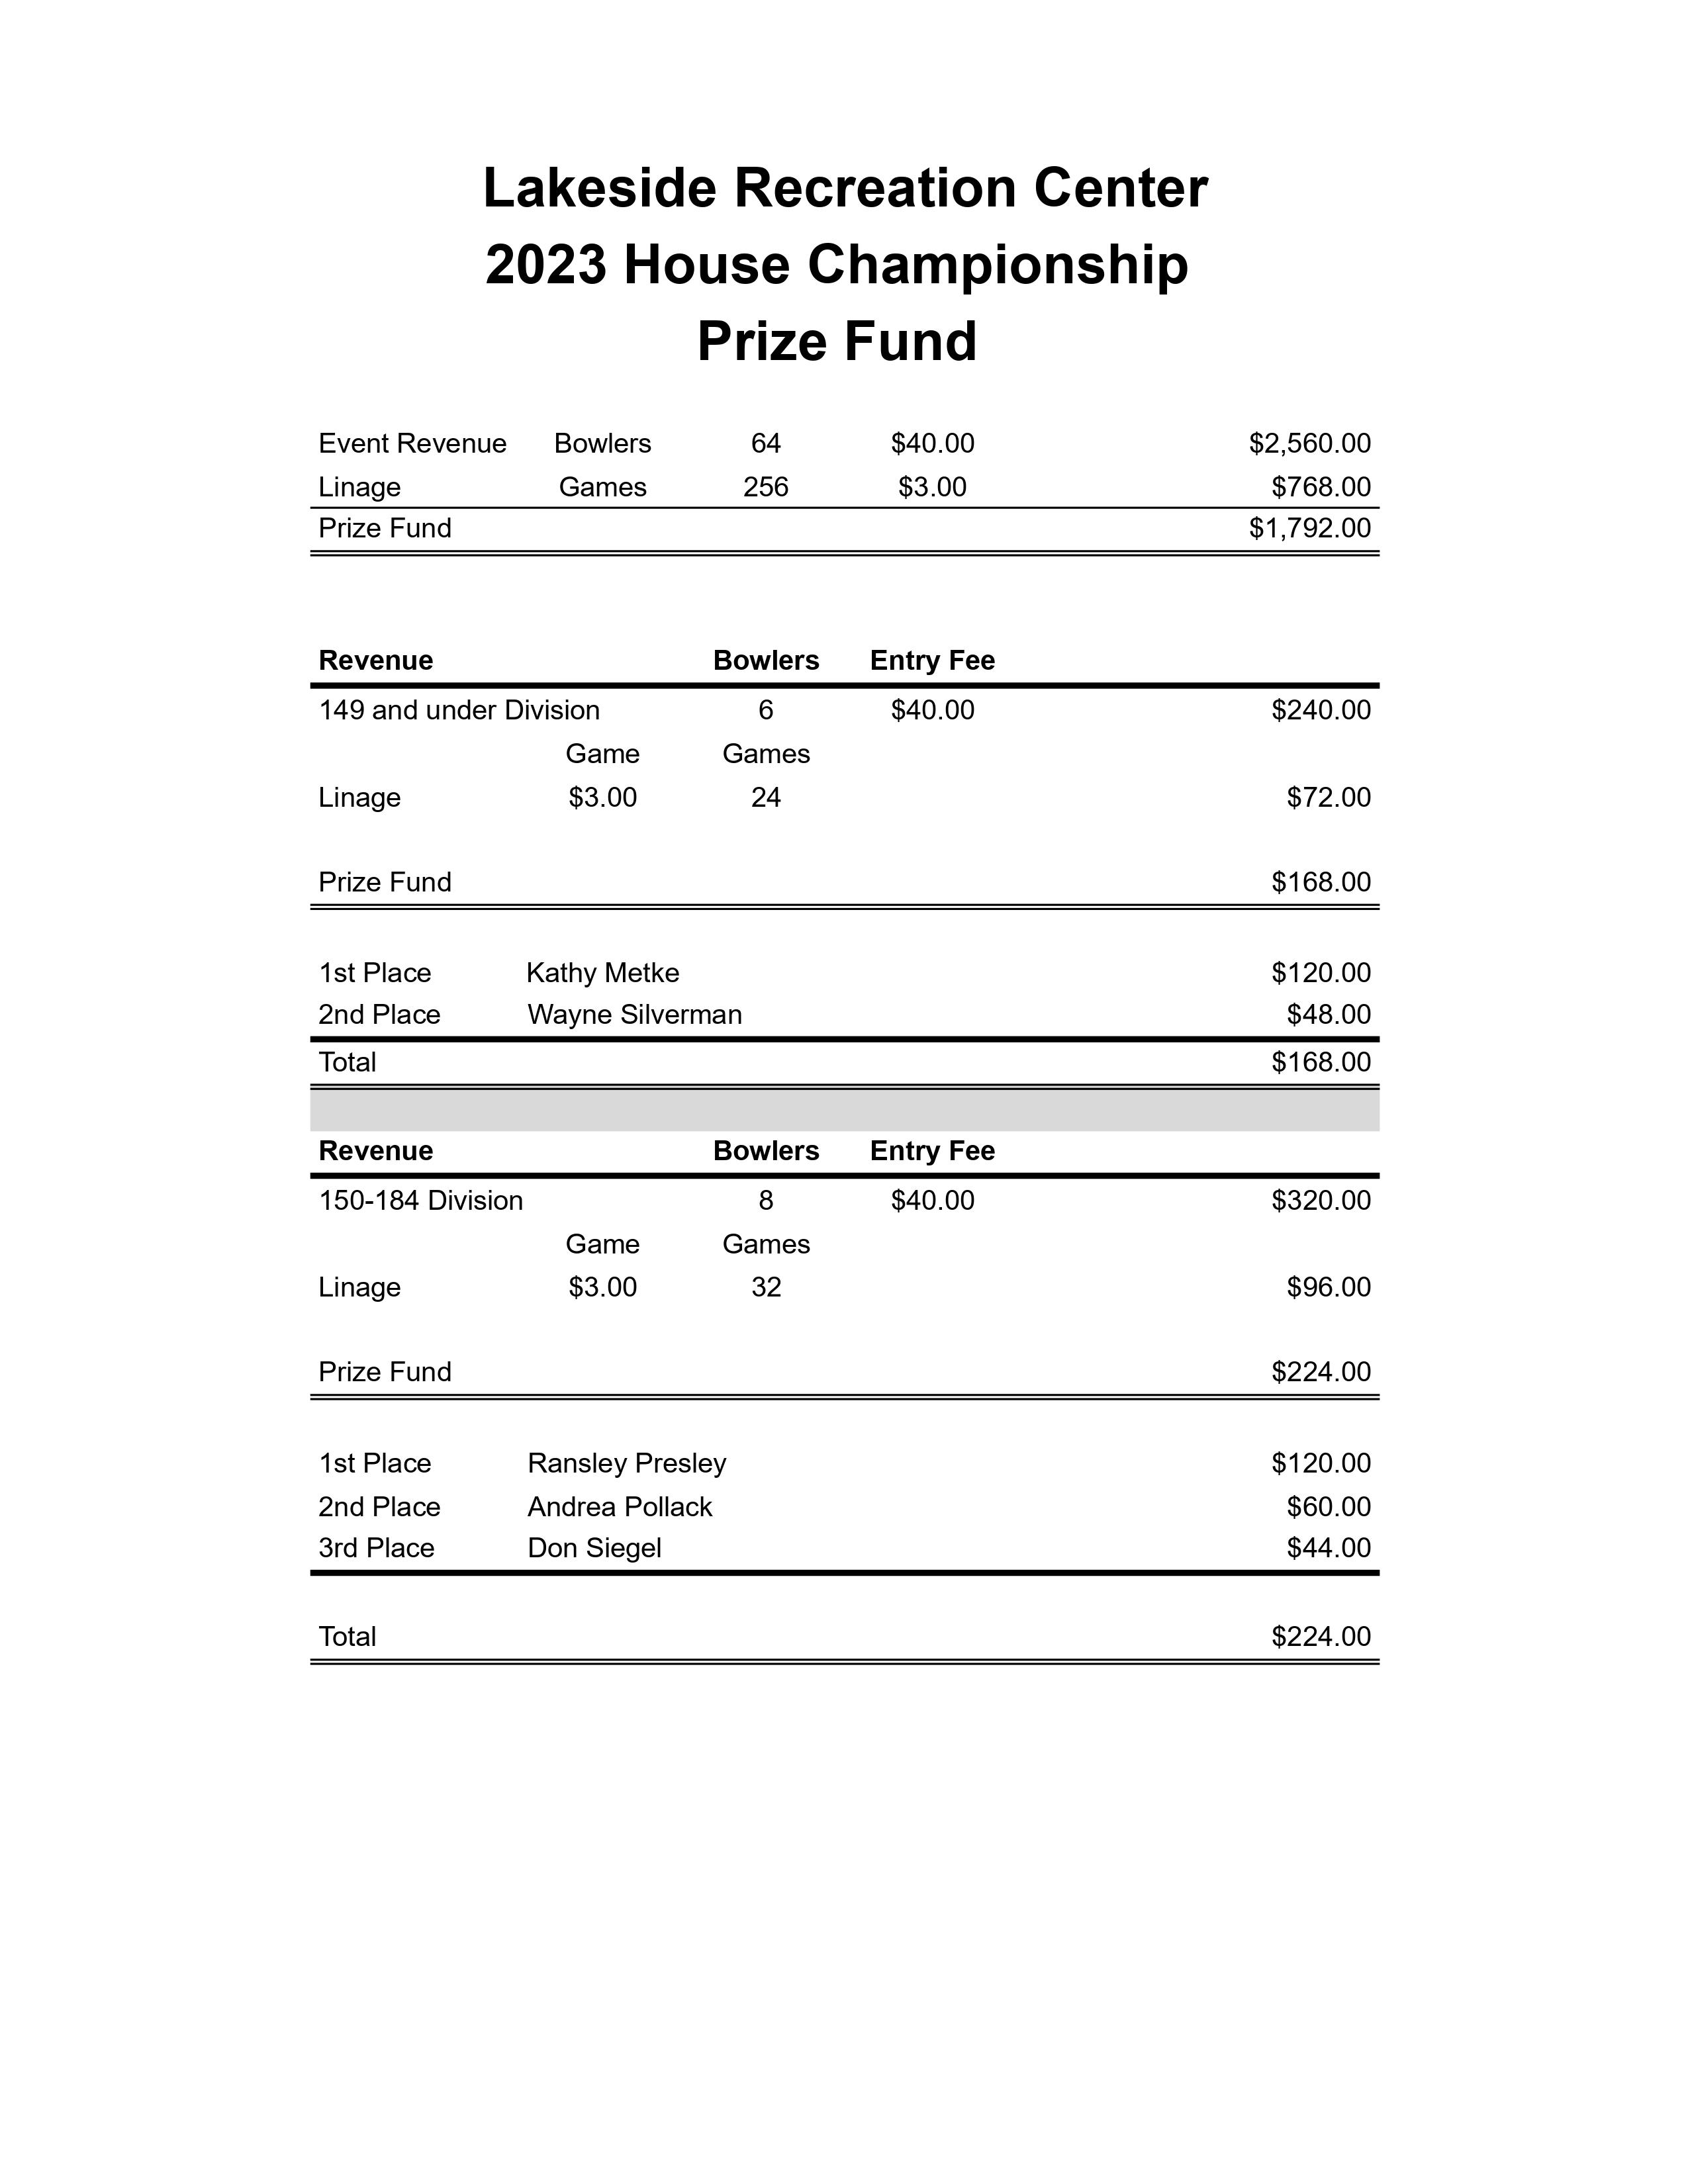 2023 Lakeside Recreation Center House Championship Prize Fund